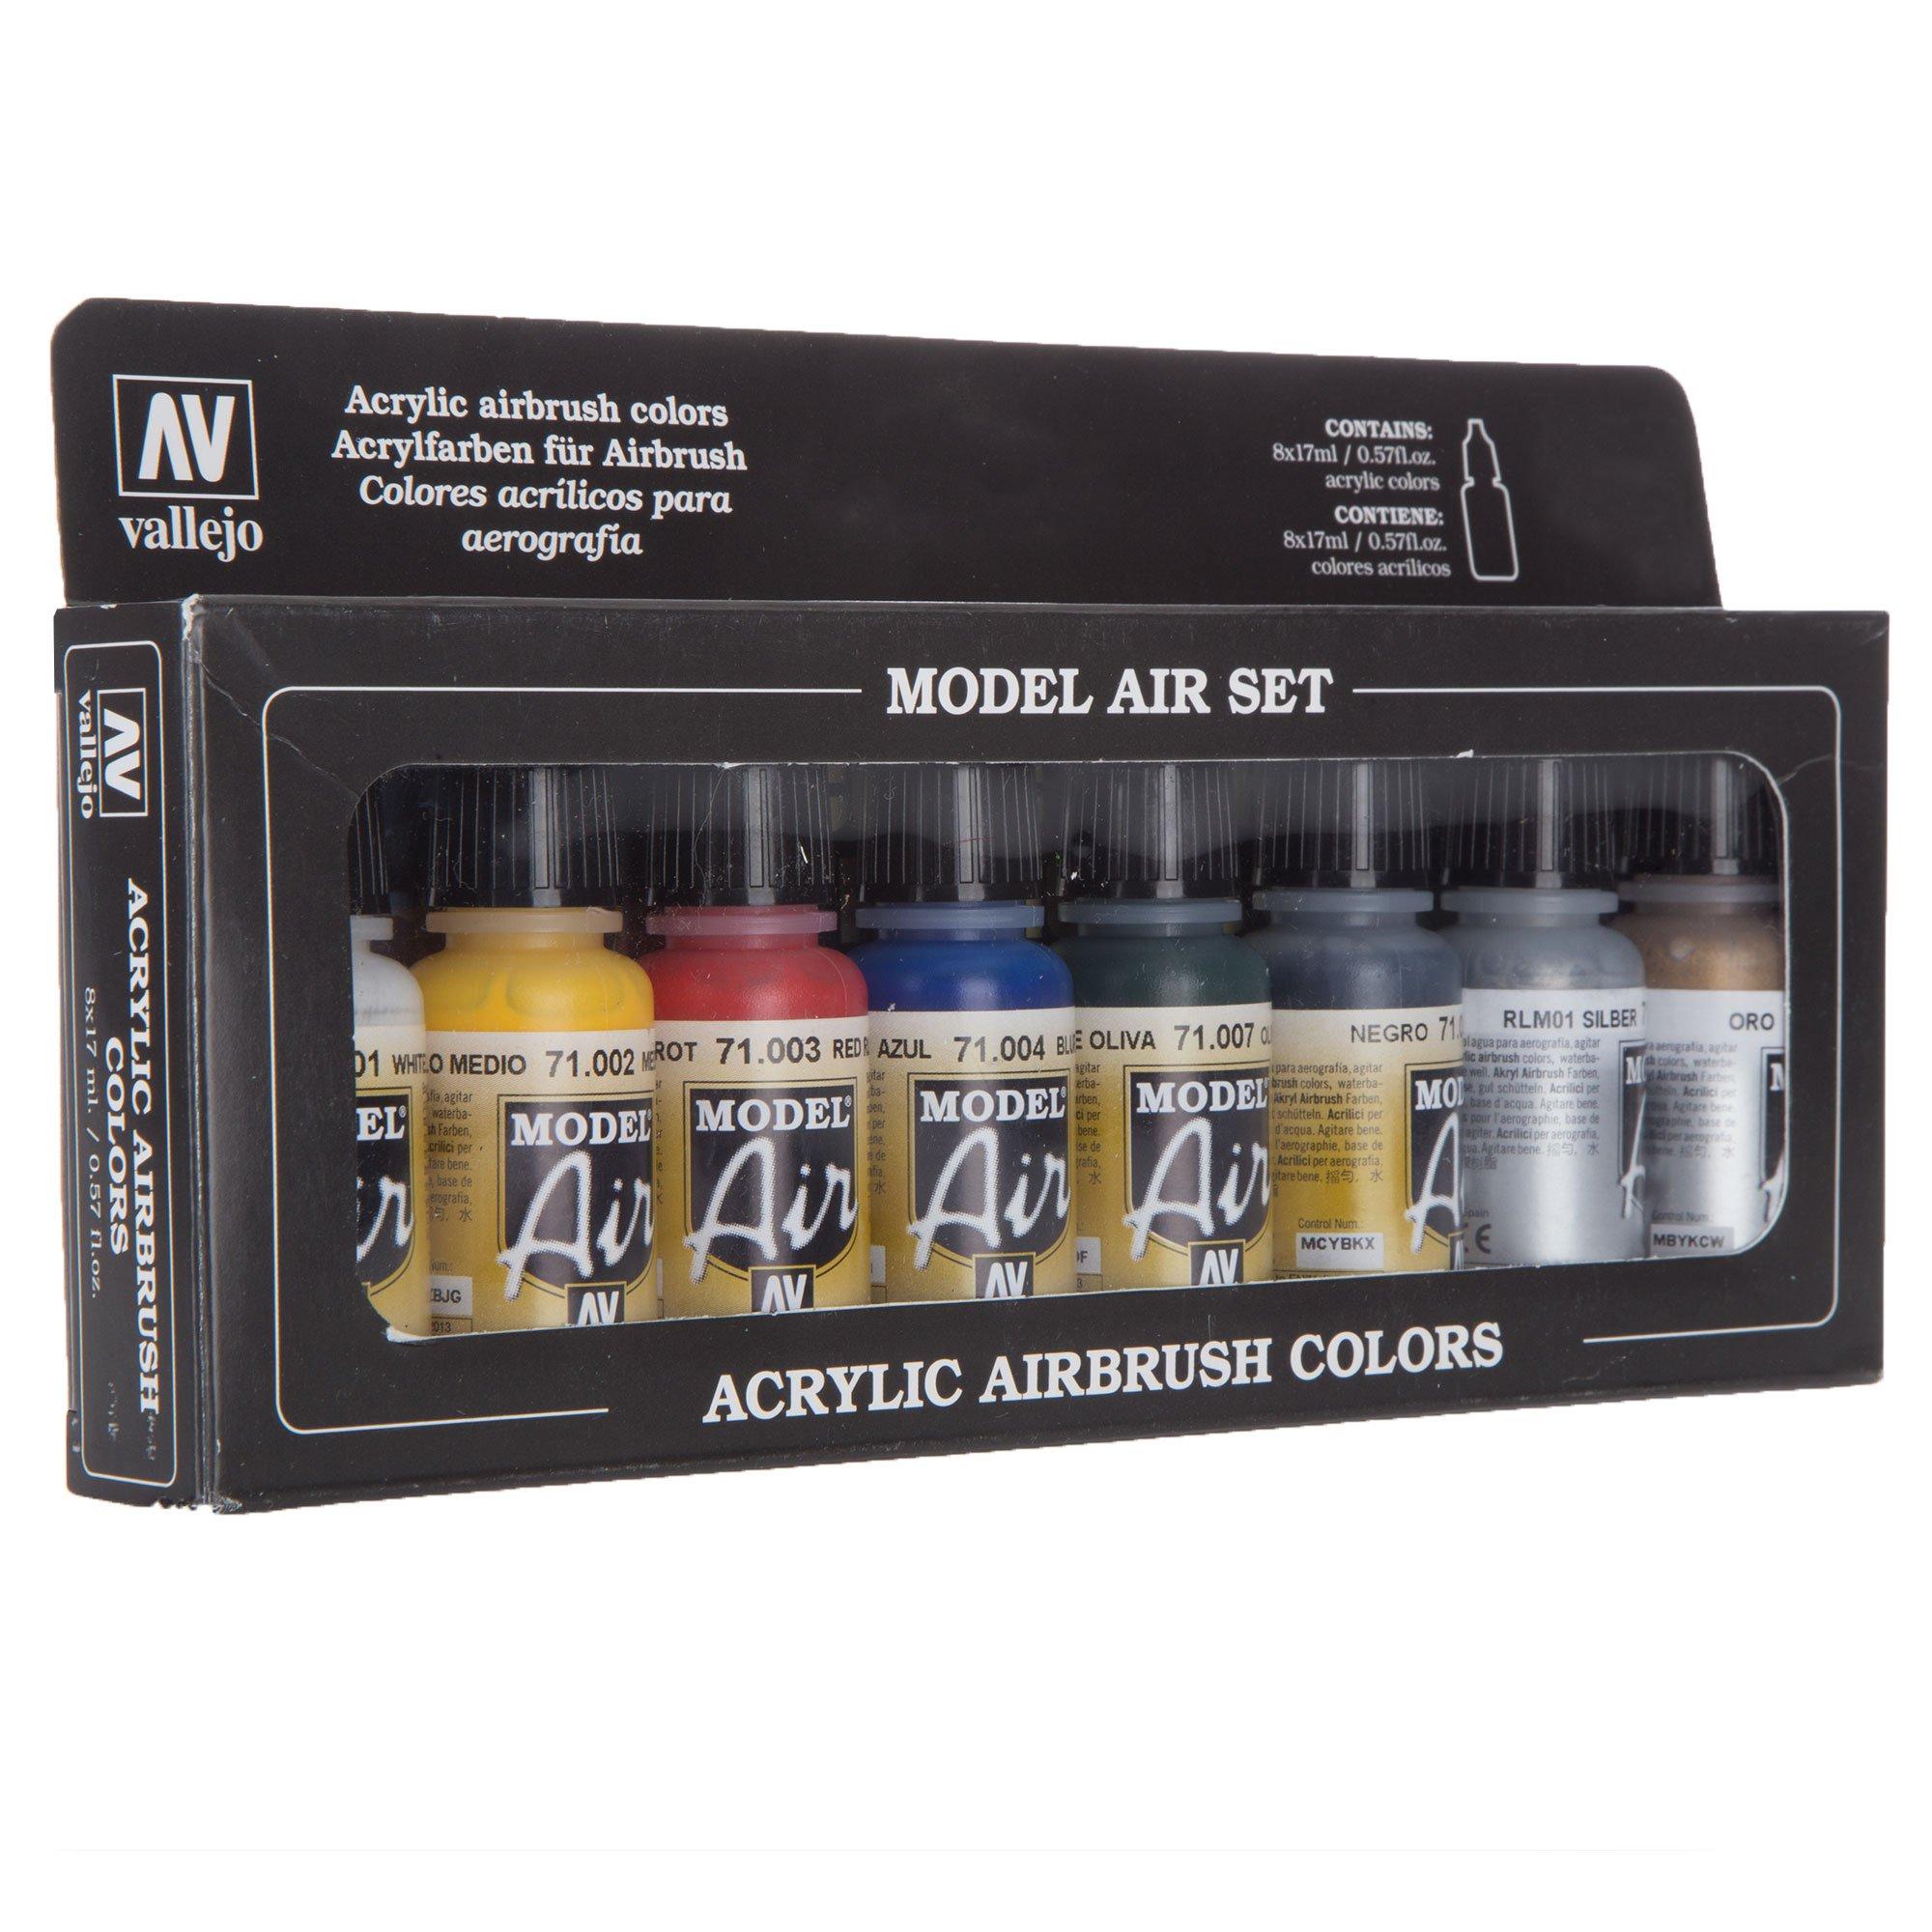 Vallejo Model Color Paint Set - Basic Colors in Plastic Carry Case -  Everything Airbrush